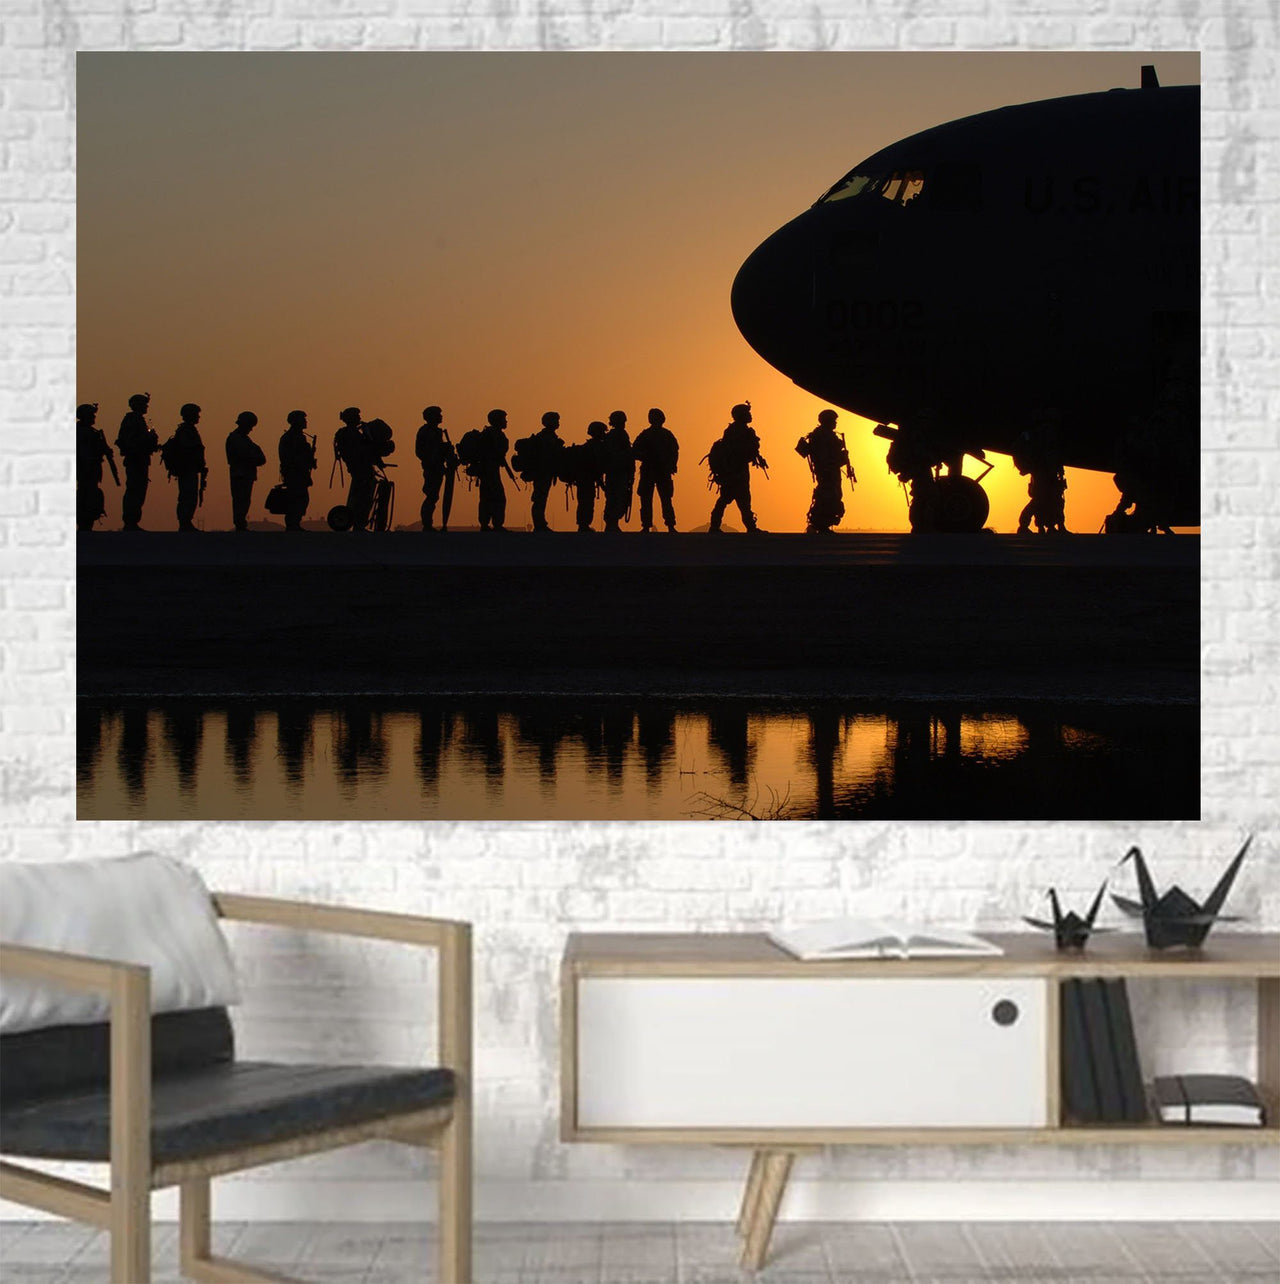 Band of Brothers Theme Soldiers Printed Canvas Posters (1 Piece) Aviation Shop 